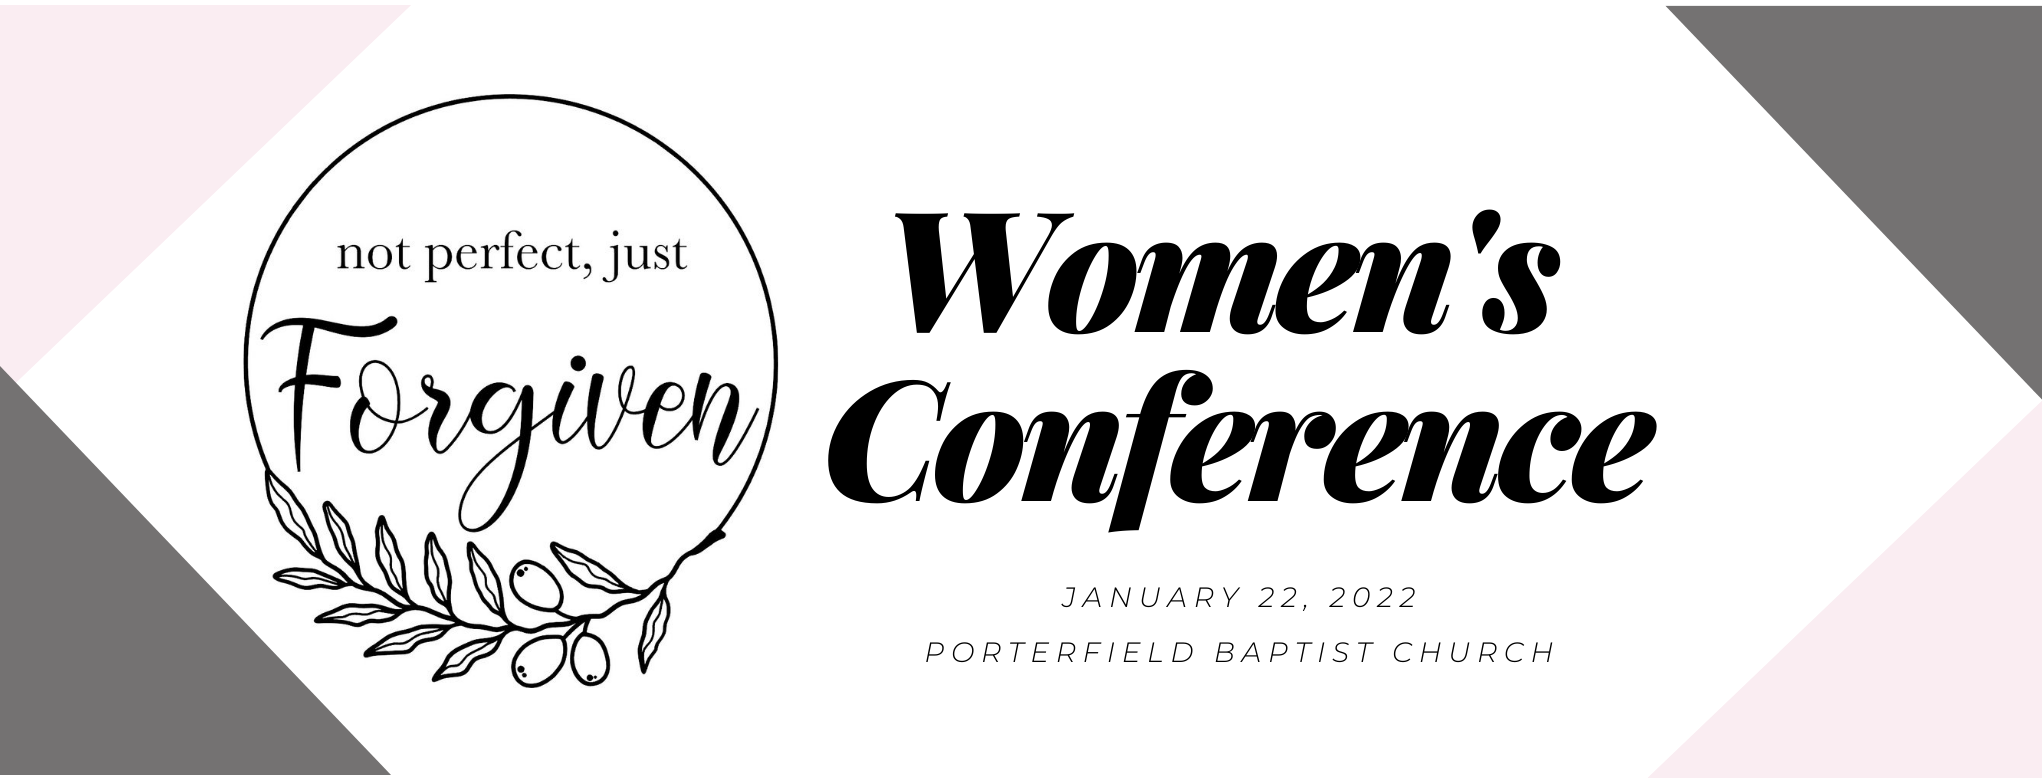 Womens Conference 2022 | Porterfield Baptist Church